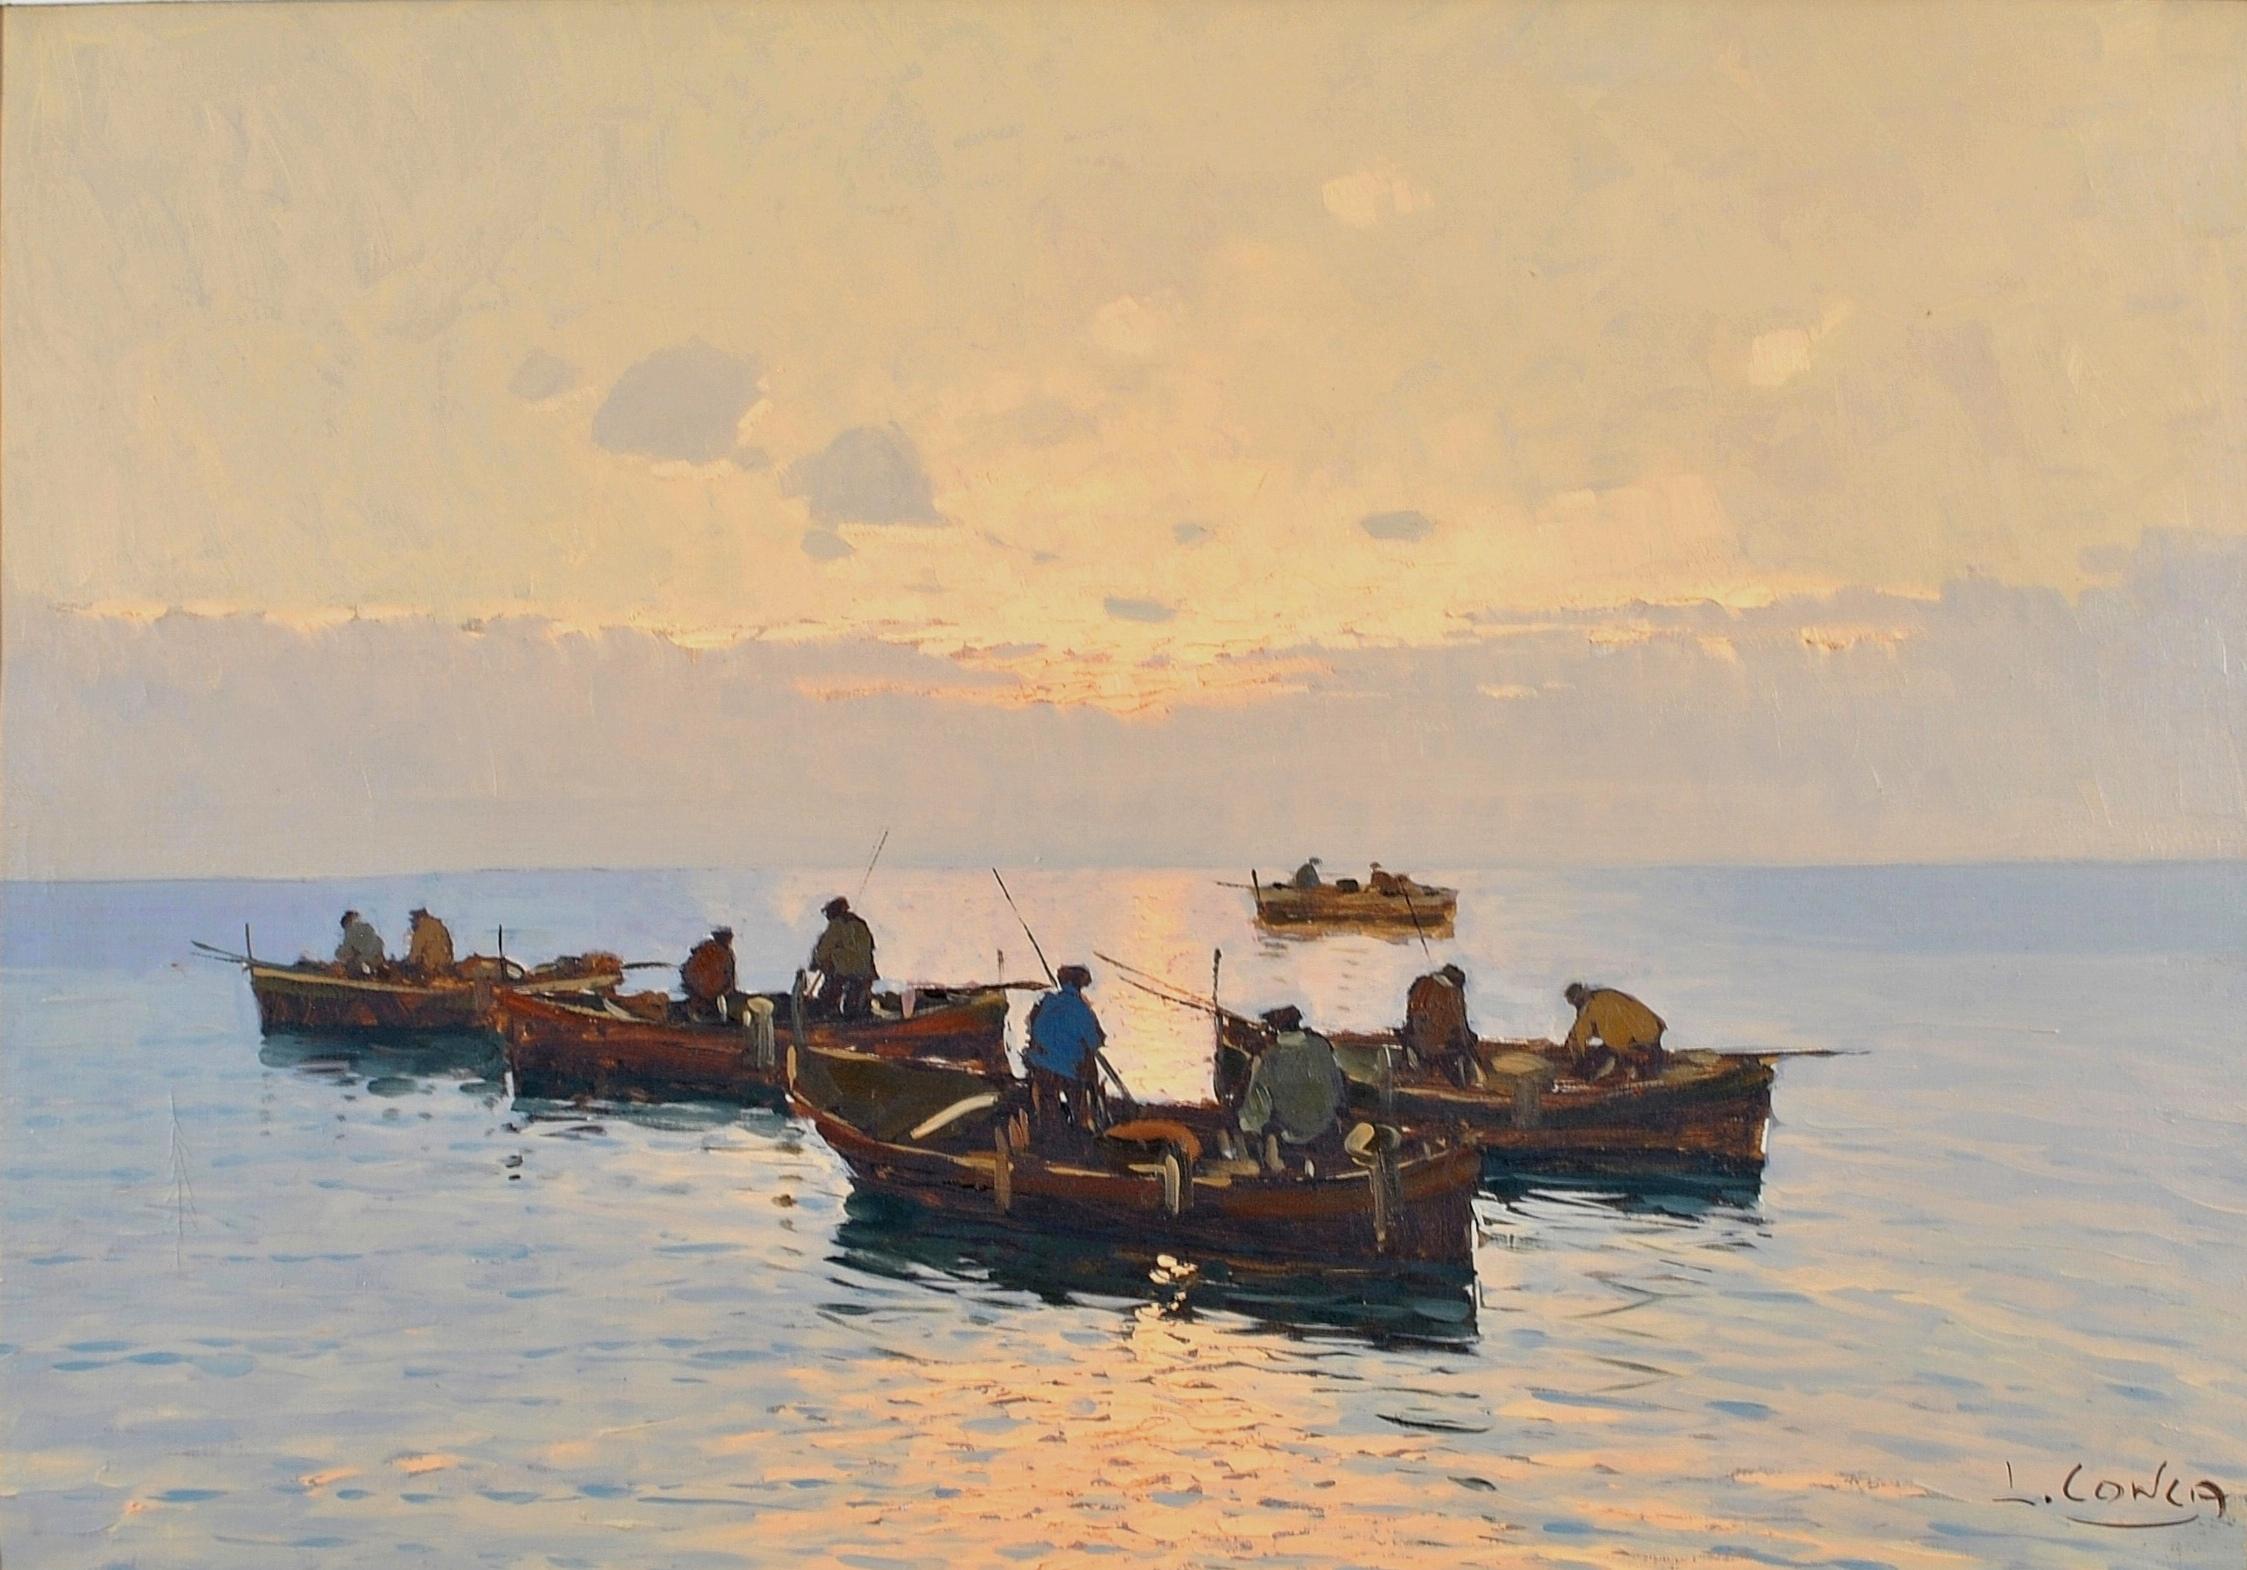 This beautiful large impressionist oil on canvas by Italian artist Luigi Conca was painted in the 1930's. The work depicts fishermen on the Gulf of Naples at sunset, most likely off the island of Capri, where the artist is known to have painted